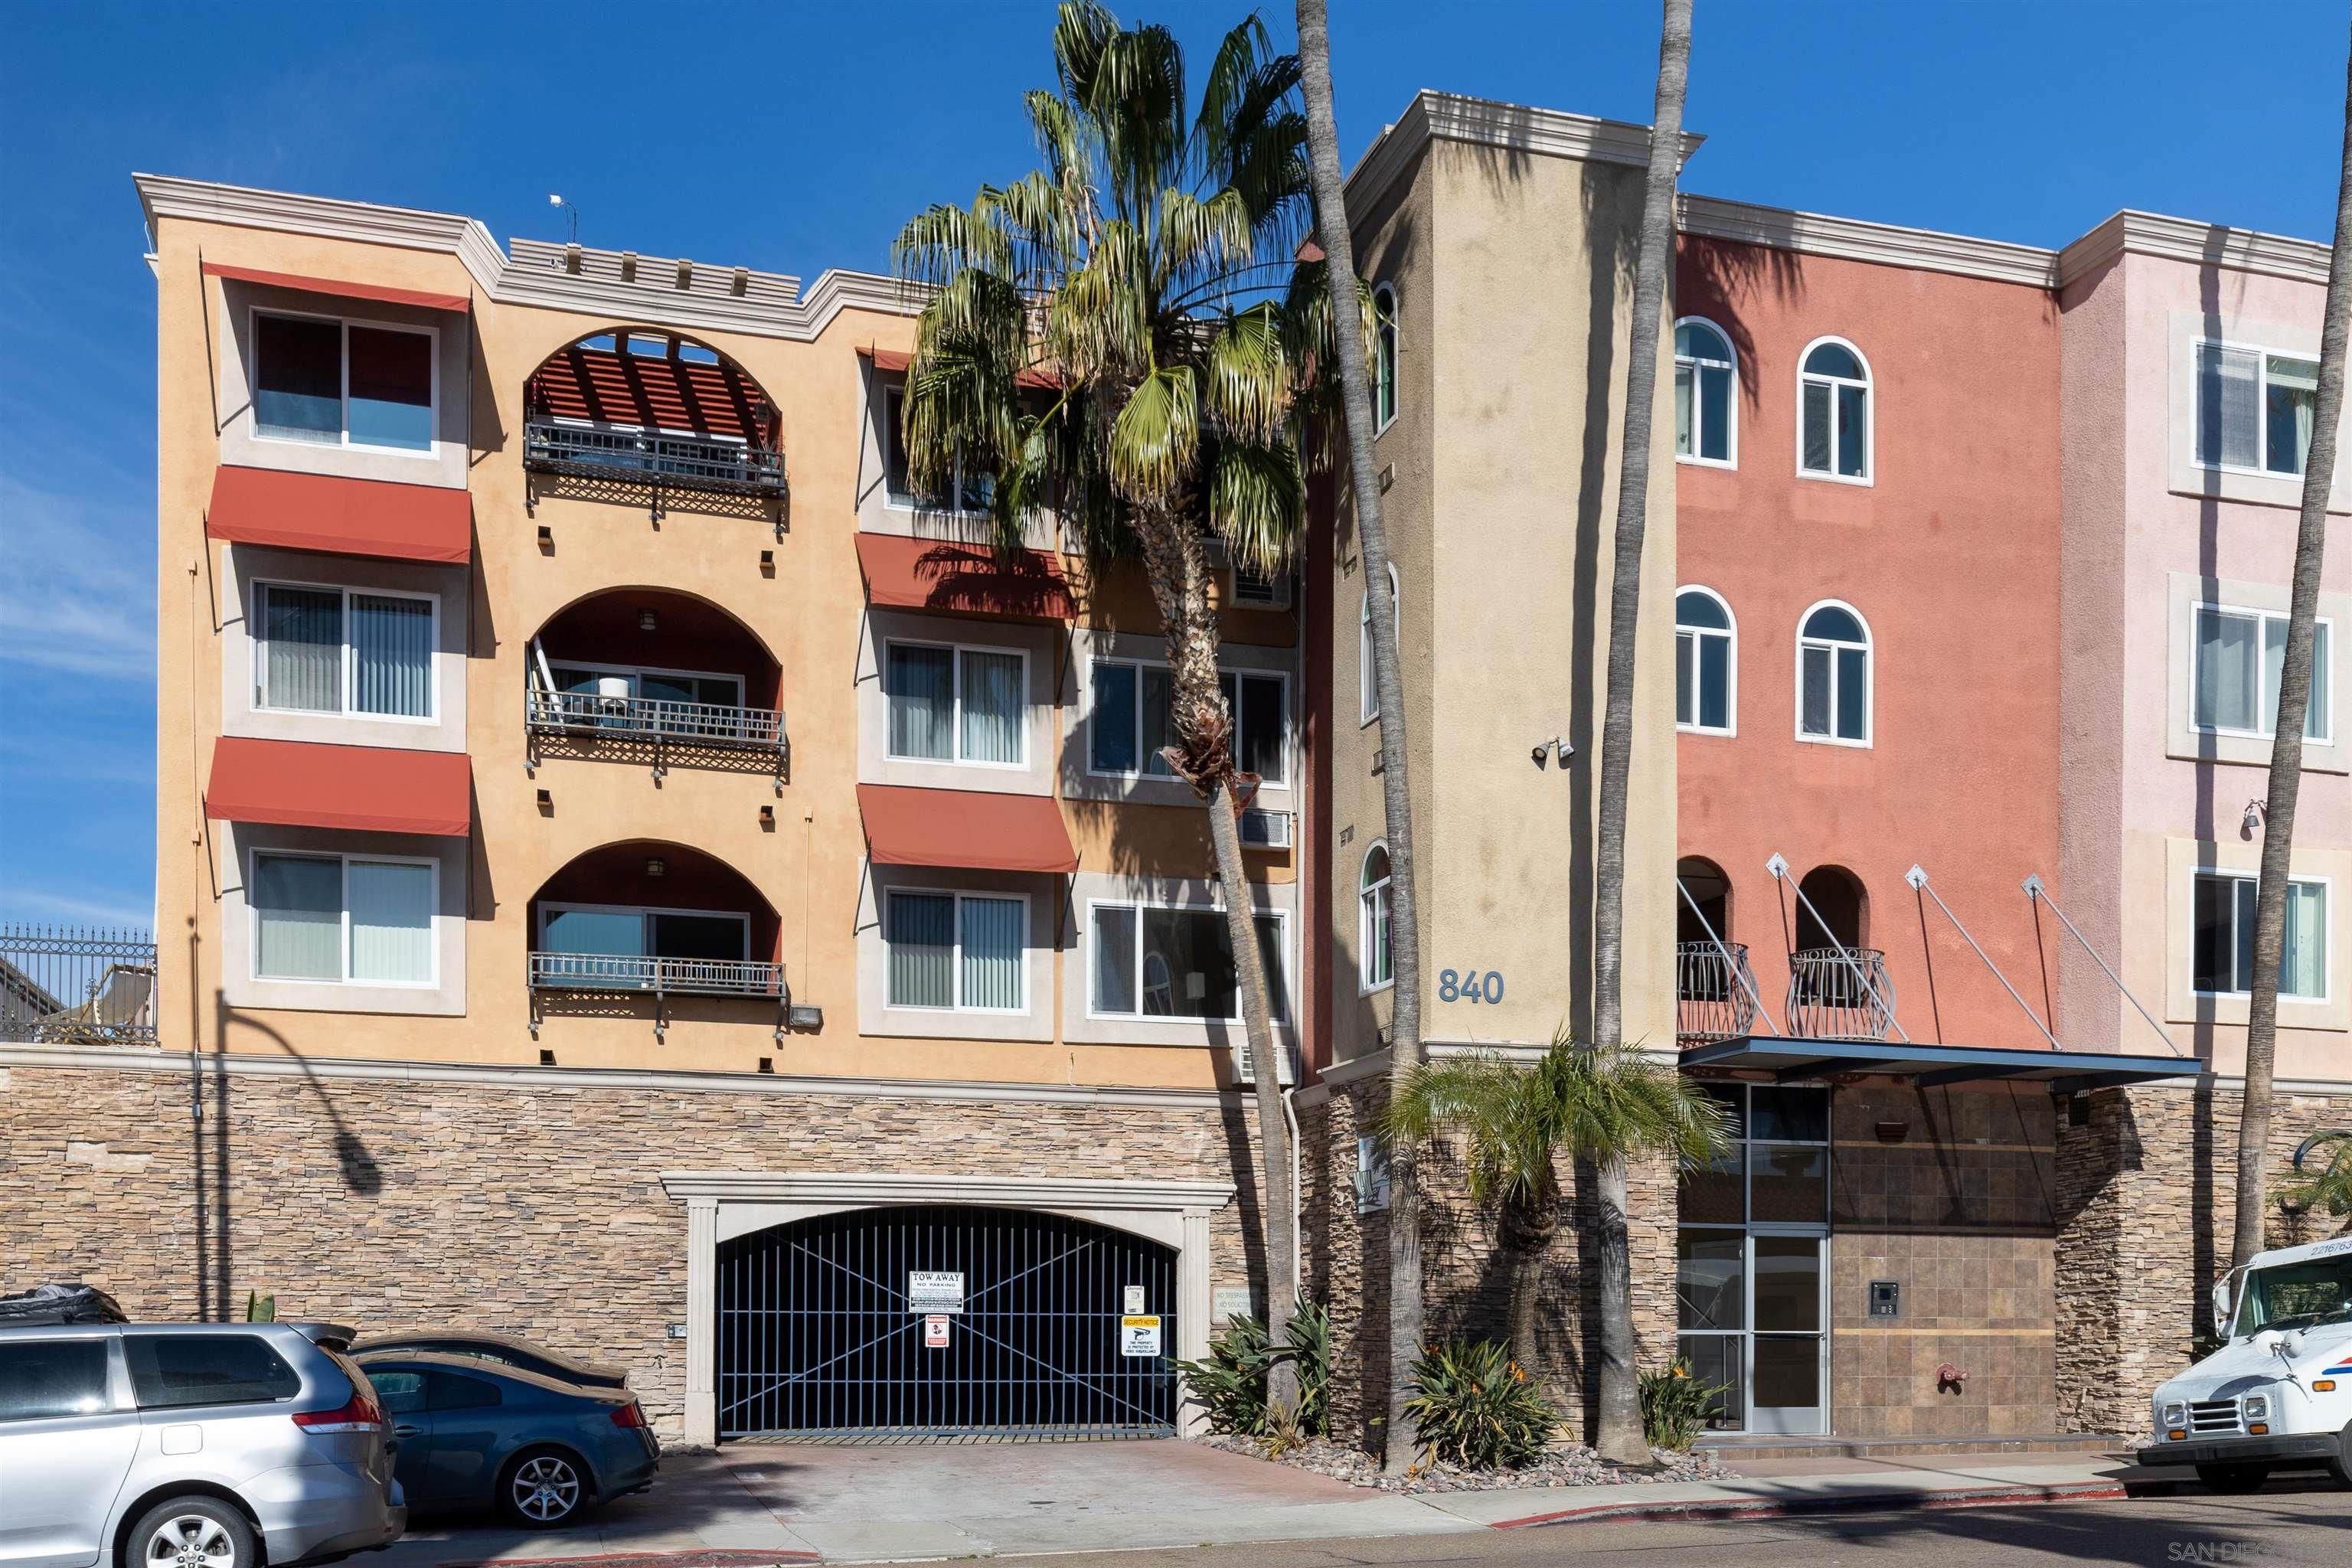 Main Photo: PACIFIC BEACH Condo for sale : 2 bedrooms : 840 Turquoise St #210 in San Diego